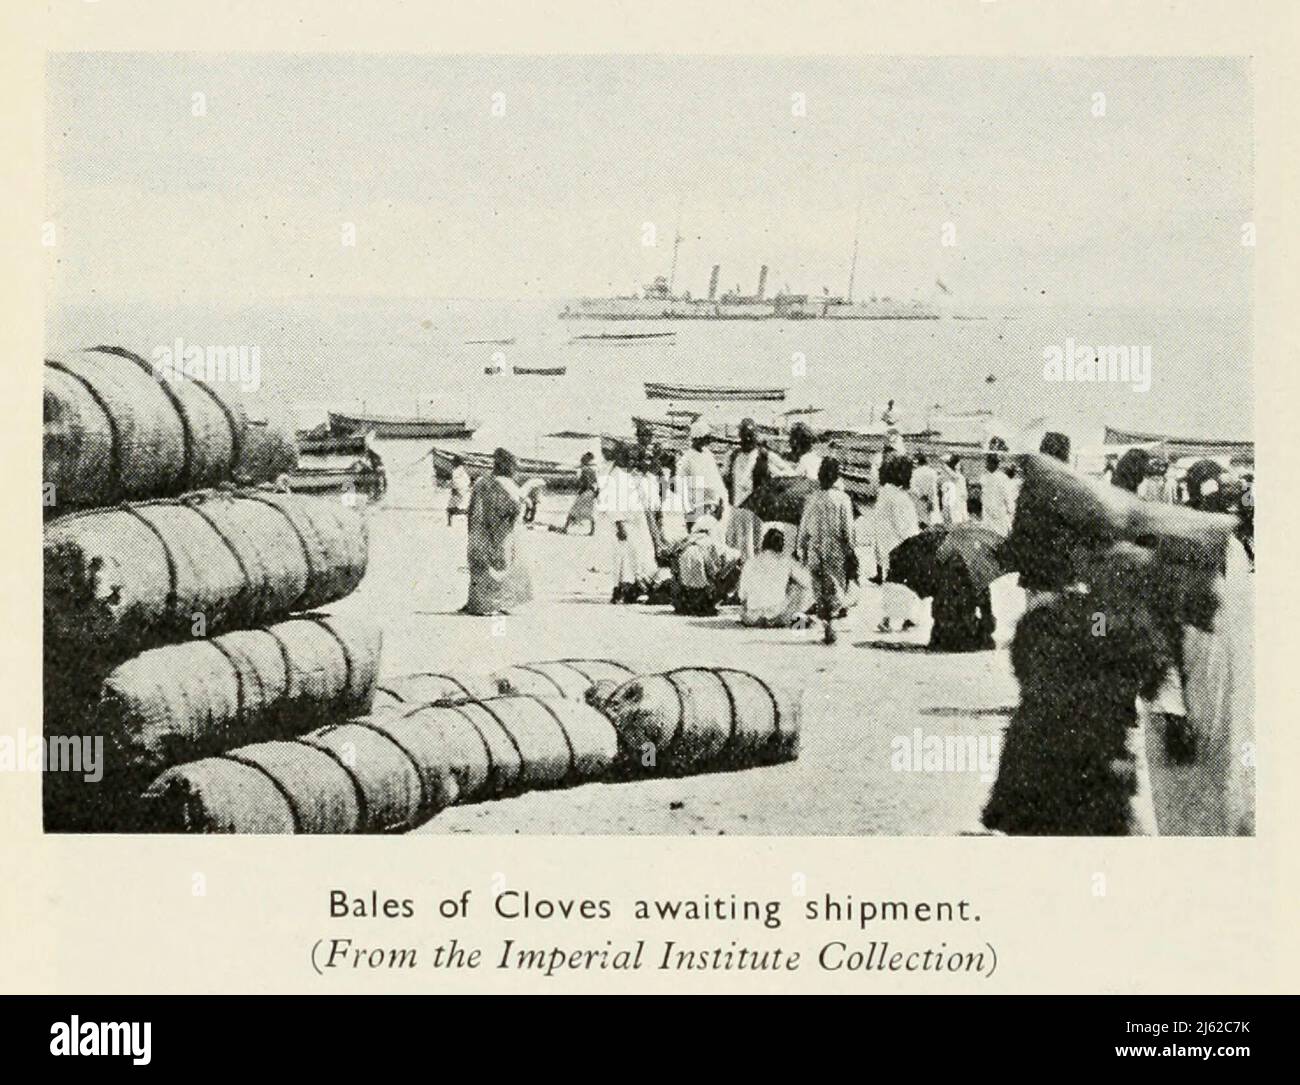 Bales of Cloves awaiting shipment from the book ' The romance of Empire drugs ' Published in London by the Scientific Department at Stafford Allen and Sons, Ltd Stock Photo